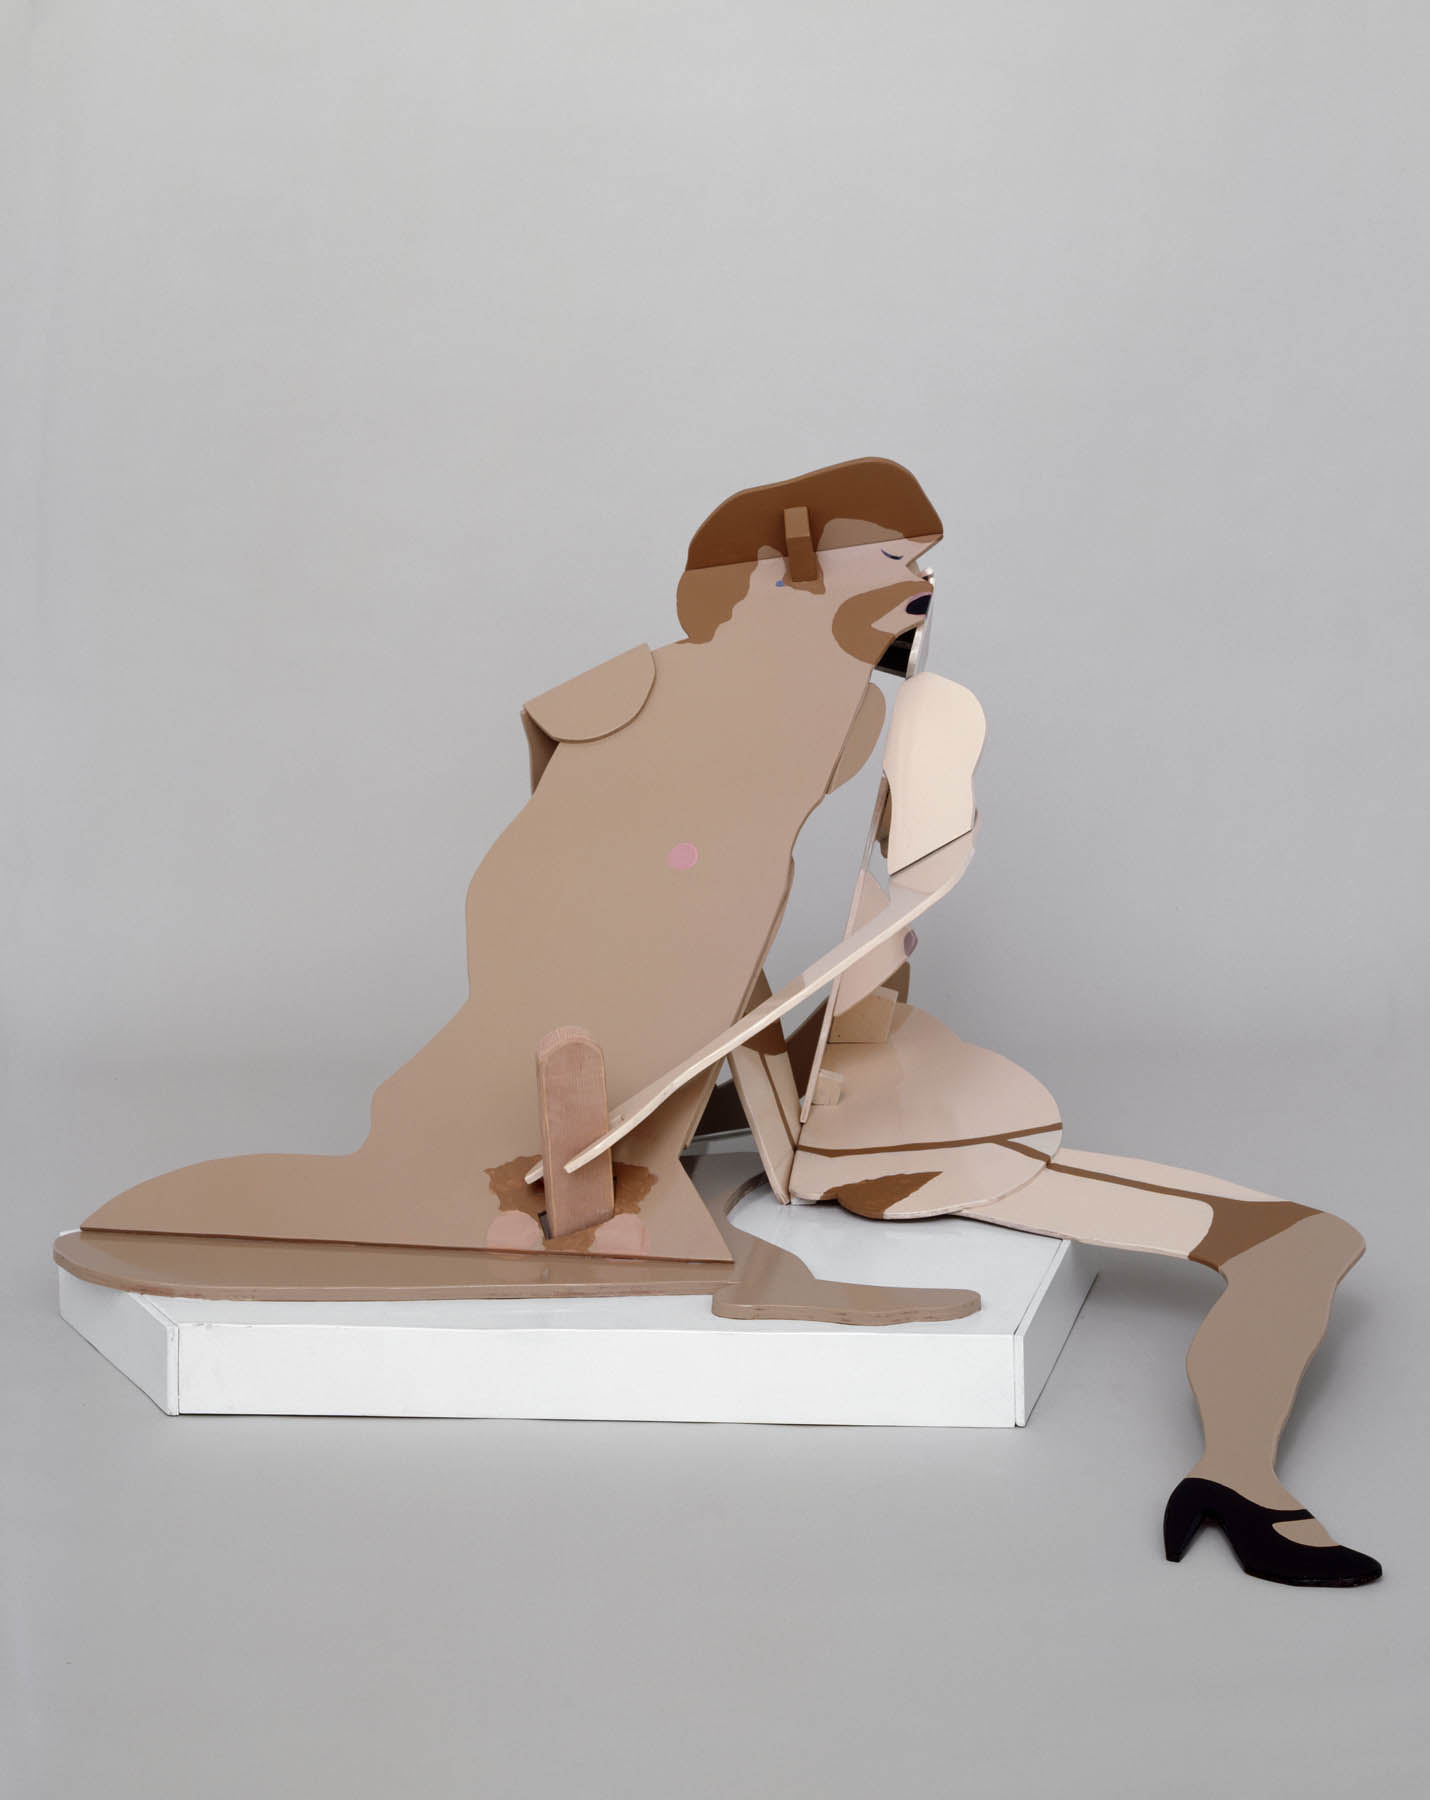 Rachel Feinstein, Humpers, 2006, Wood and enamel paint, Private collection,...